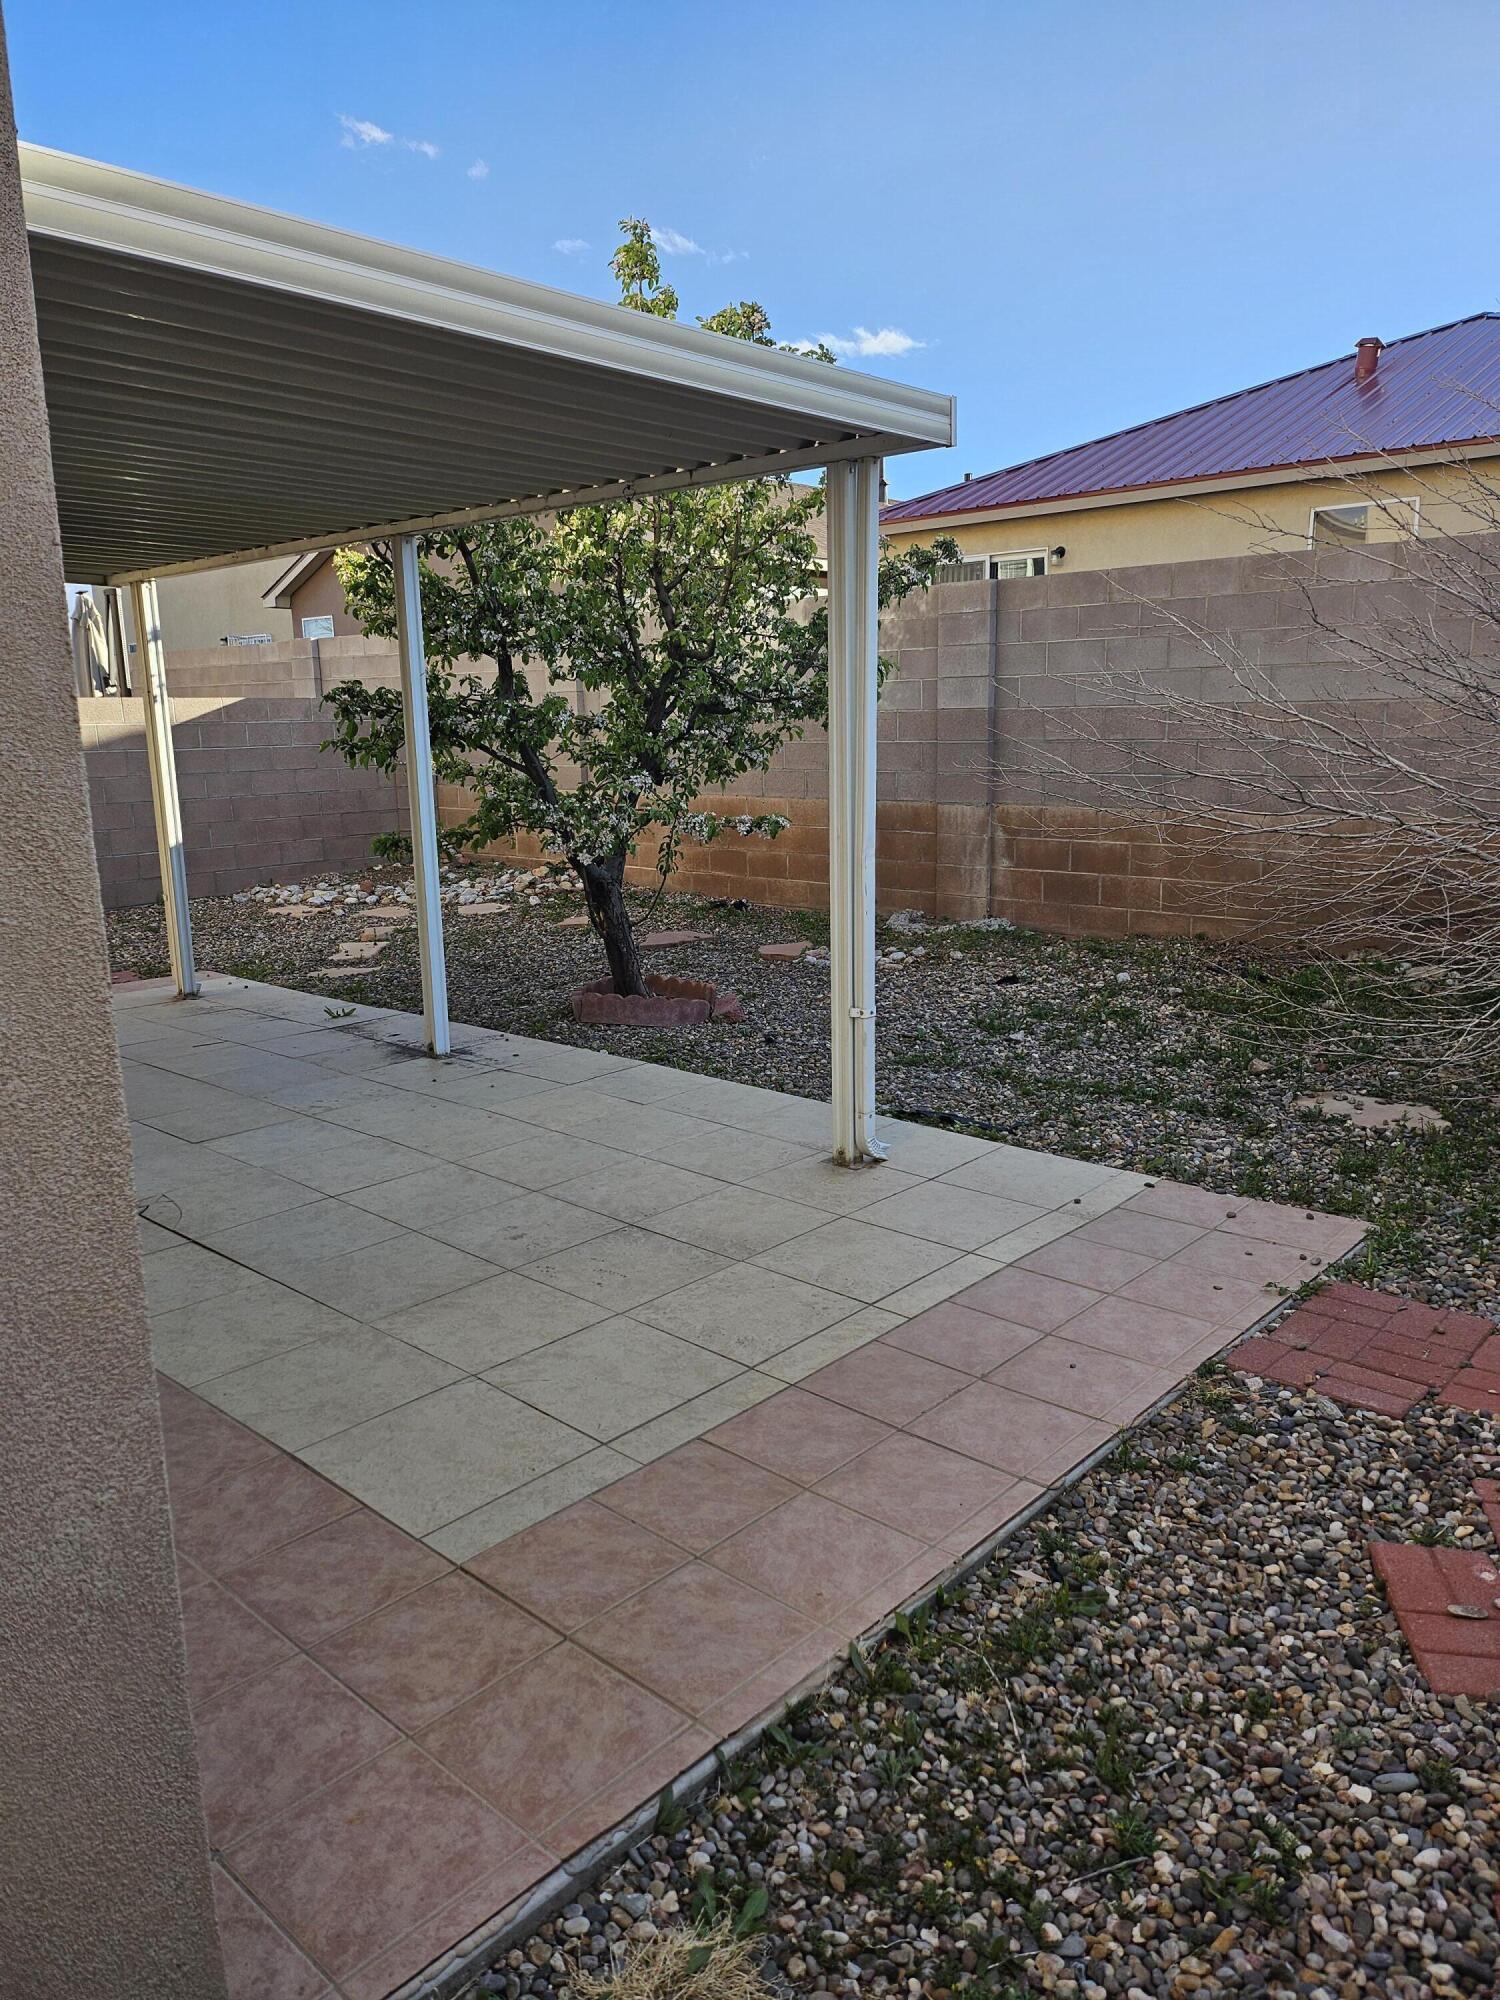 8612 Gunnison Place NW, Albuquerque, New Mexico 87120, 3 Bedrooms Bedrooms, ,3 BathroomsBathrooms,Residential,For Sale,8612 Gunnison Place NW,1059731